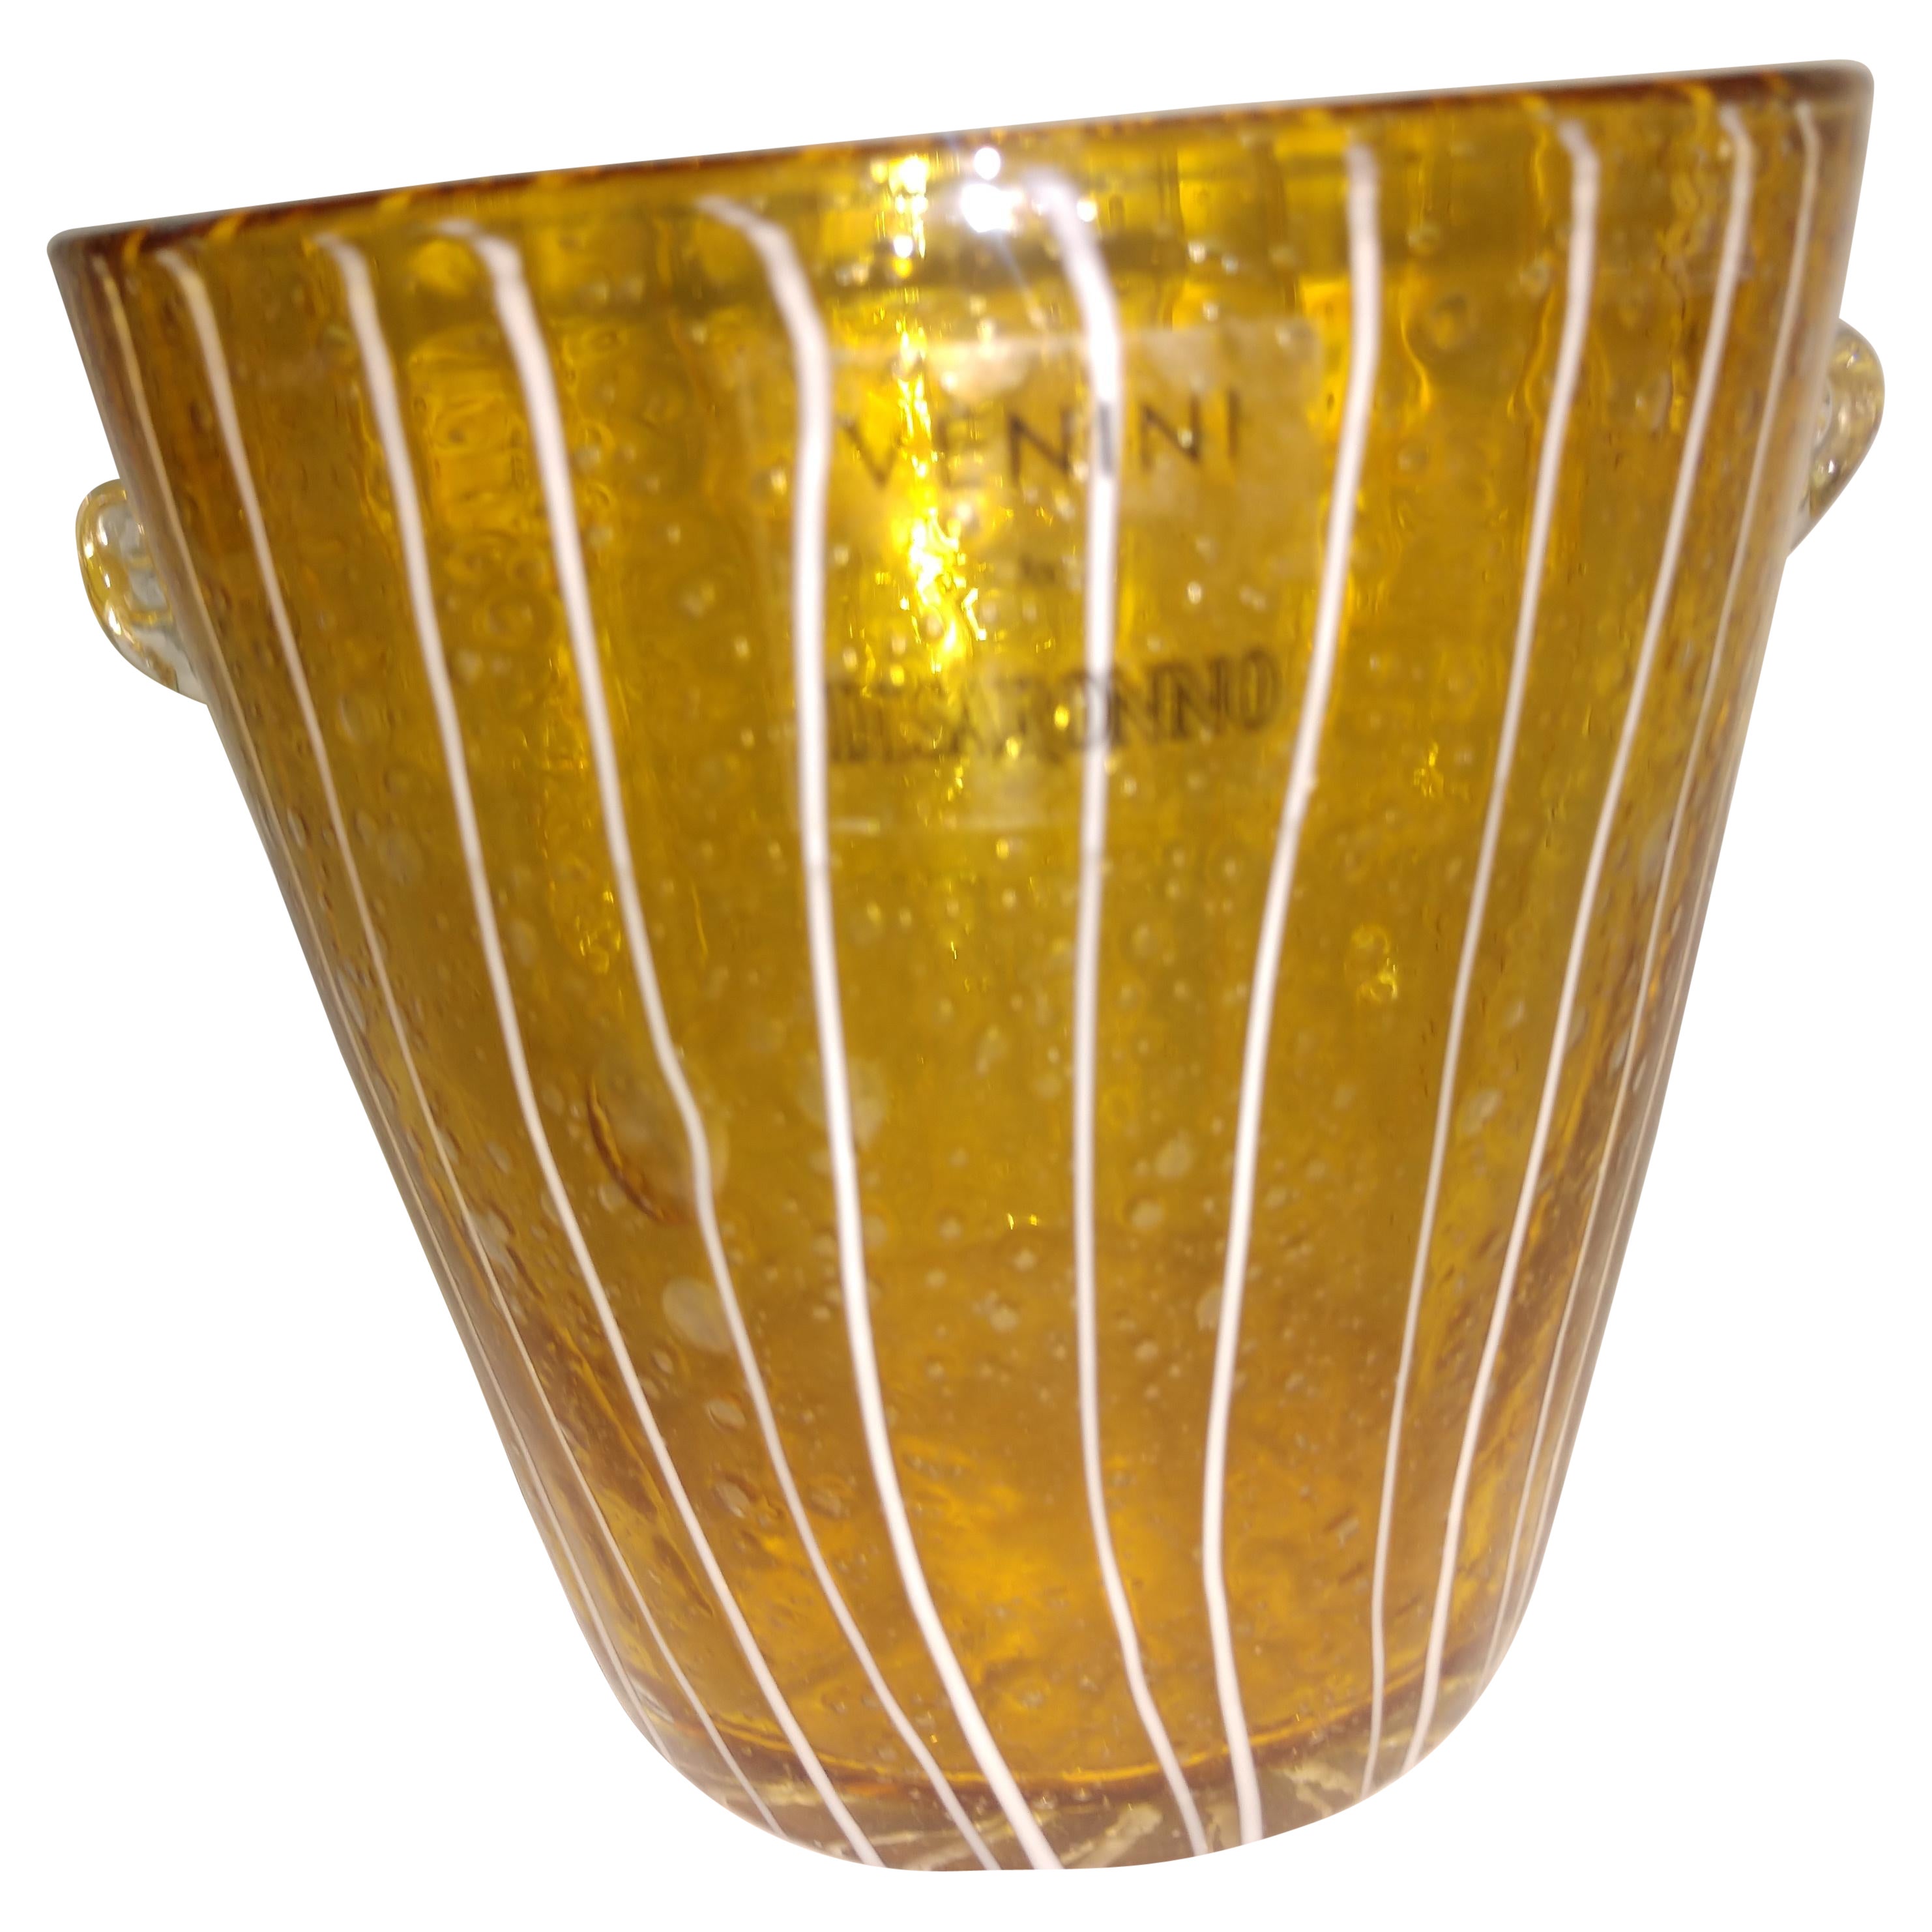 Striking art glass vase ice bucket by Venini for Disaronno. Beautiful amber glass with a white striped drizzle.